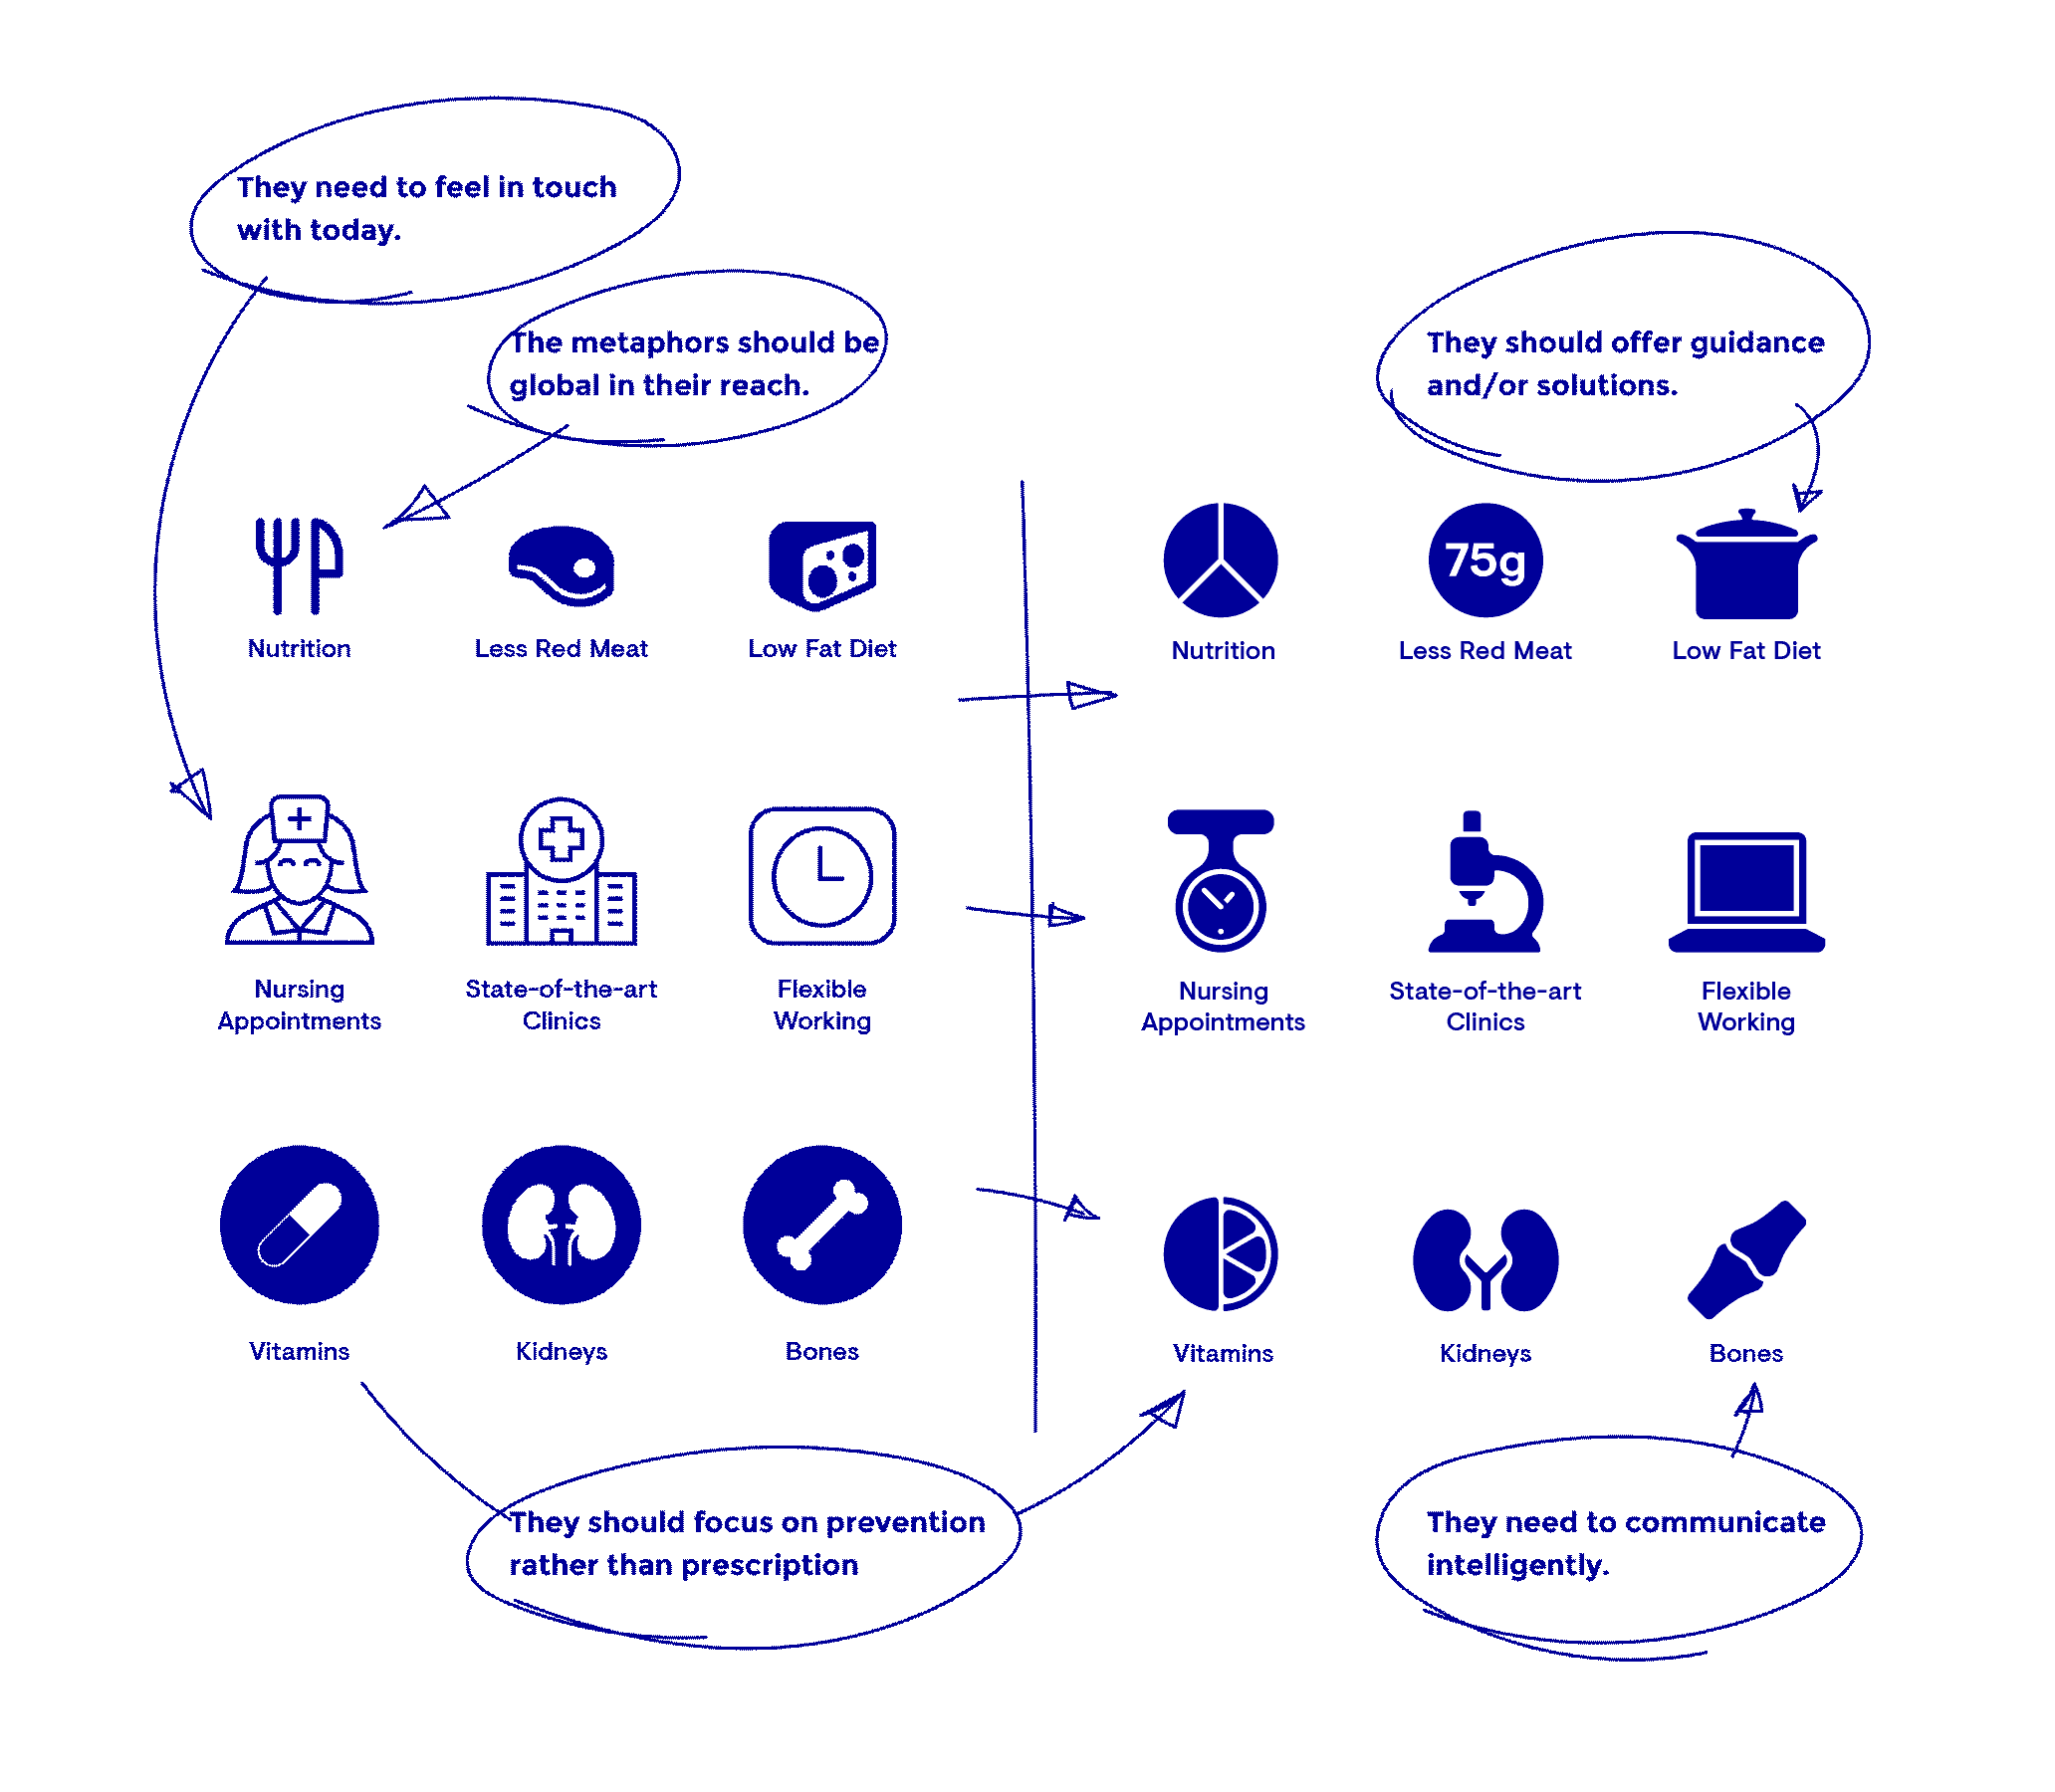 A working diagram illustrating the approach I took with this project. Namely, moving away from prescription-based standard medical metaphors to prevention methods.